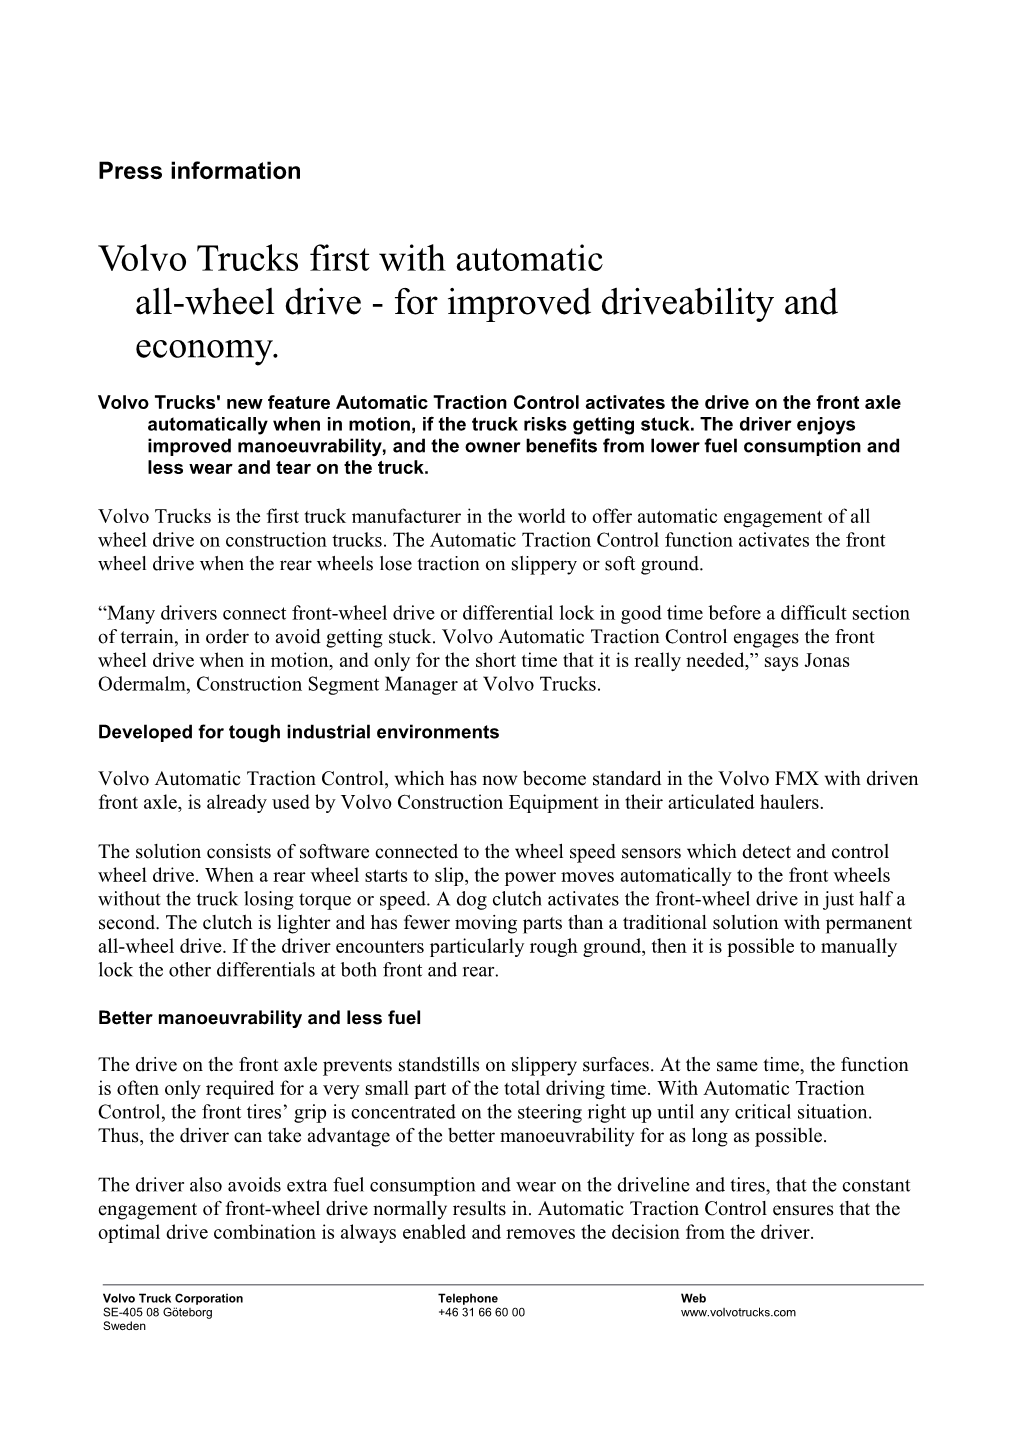 Volvo Trucks First with Automaticall-Wheel Drive - for Improved Driveability and Economy